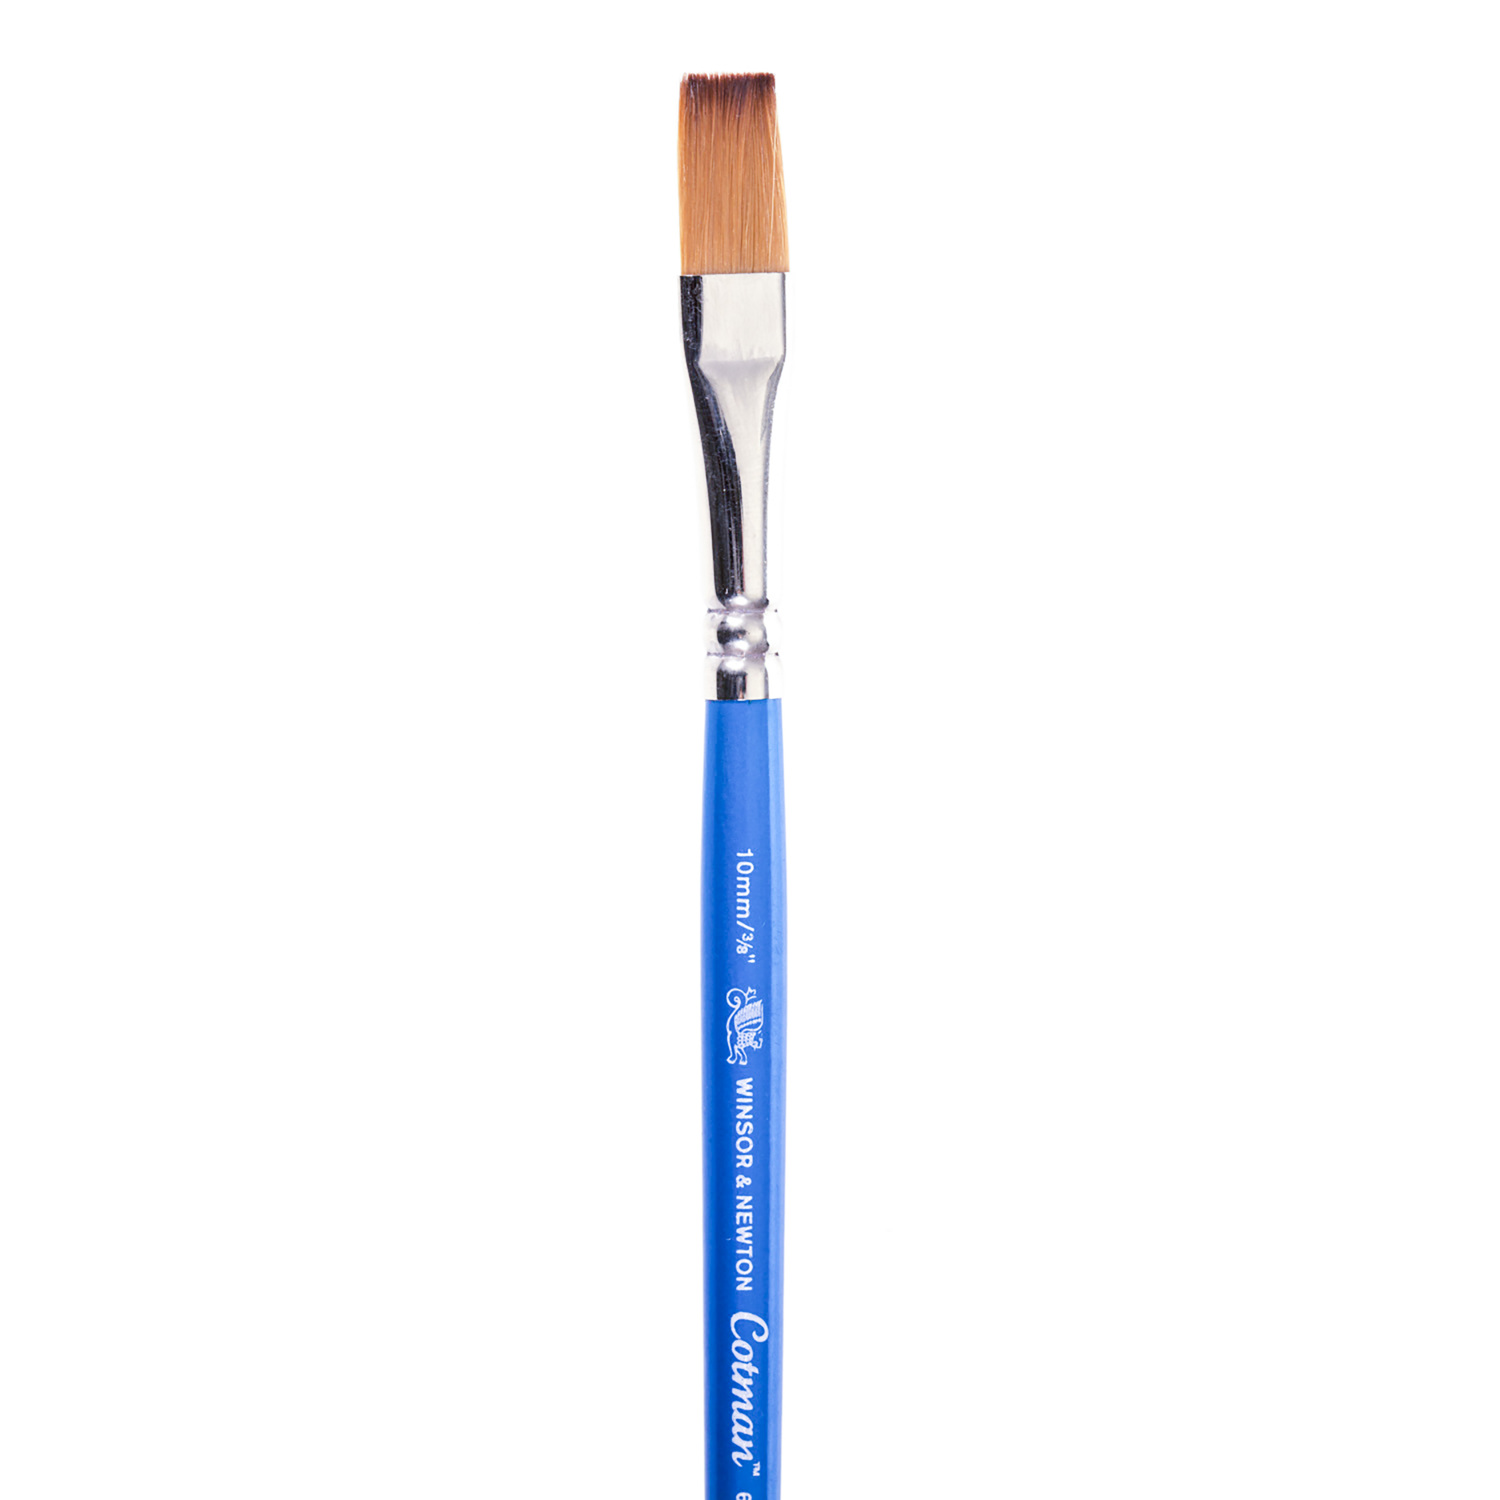 Winsor and Newton Series 666 Cotman One Stroke Watercolour Brushes - 3/8 in (9.5 mm) Image 1